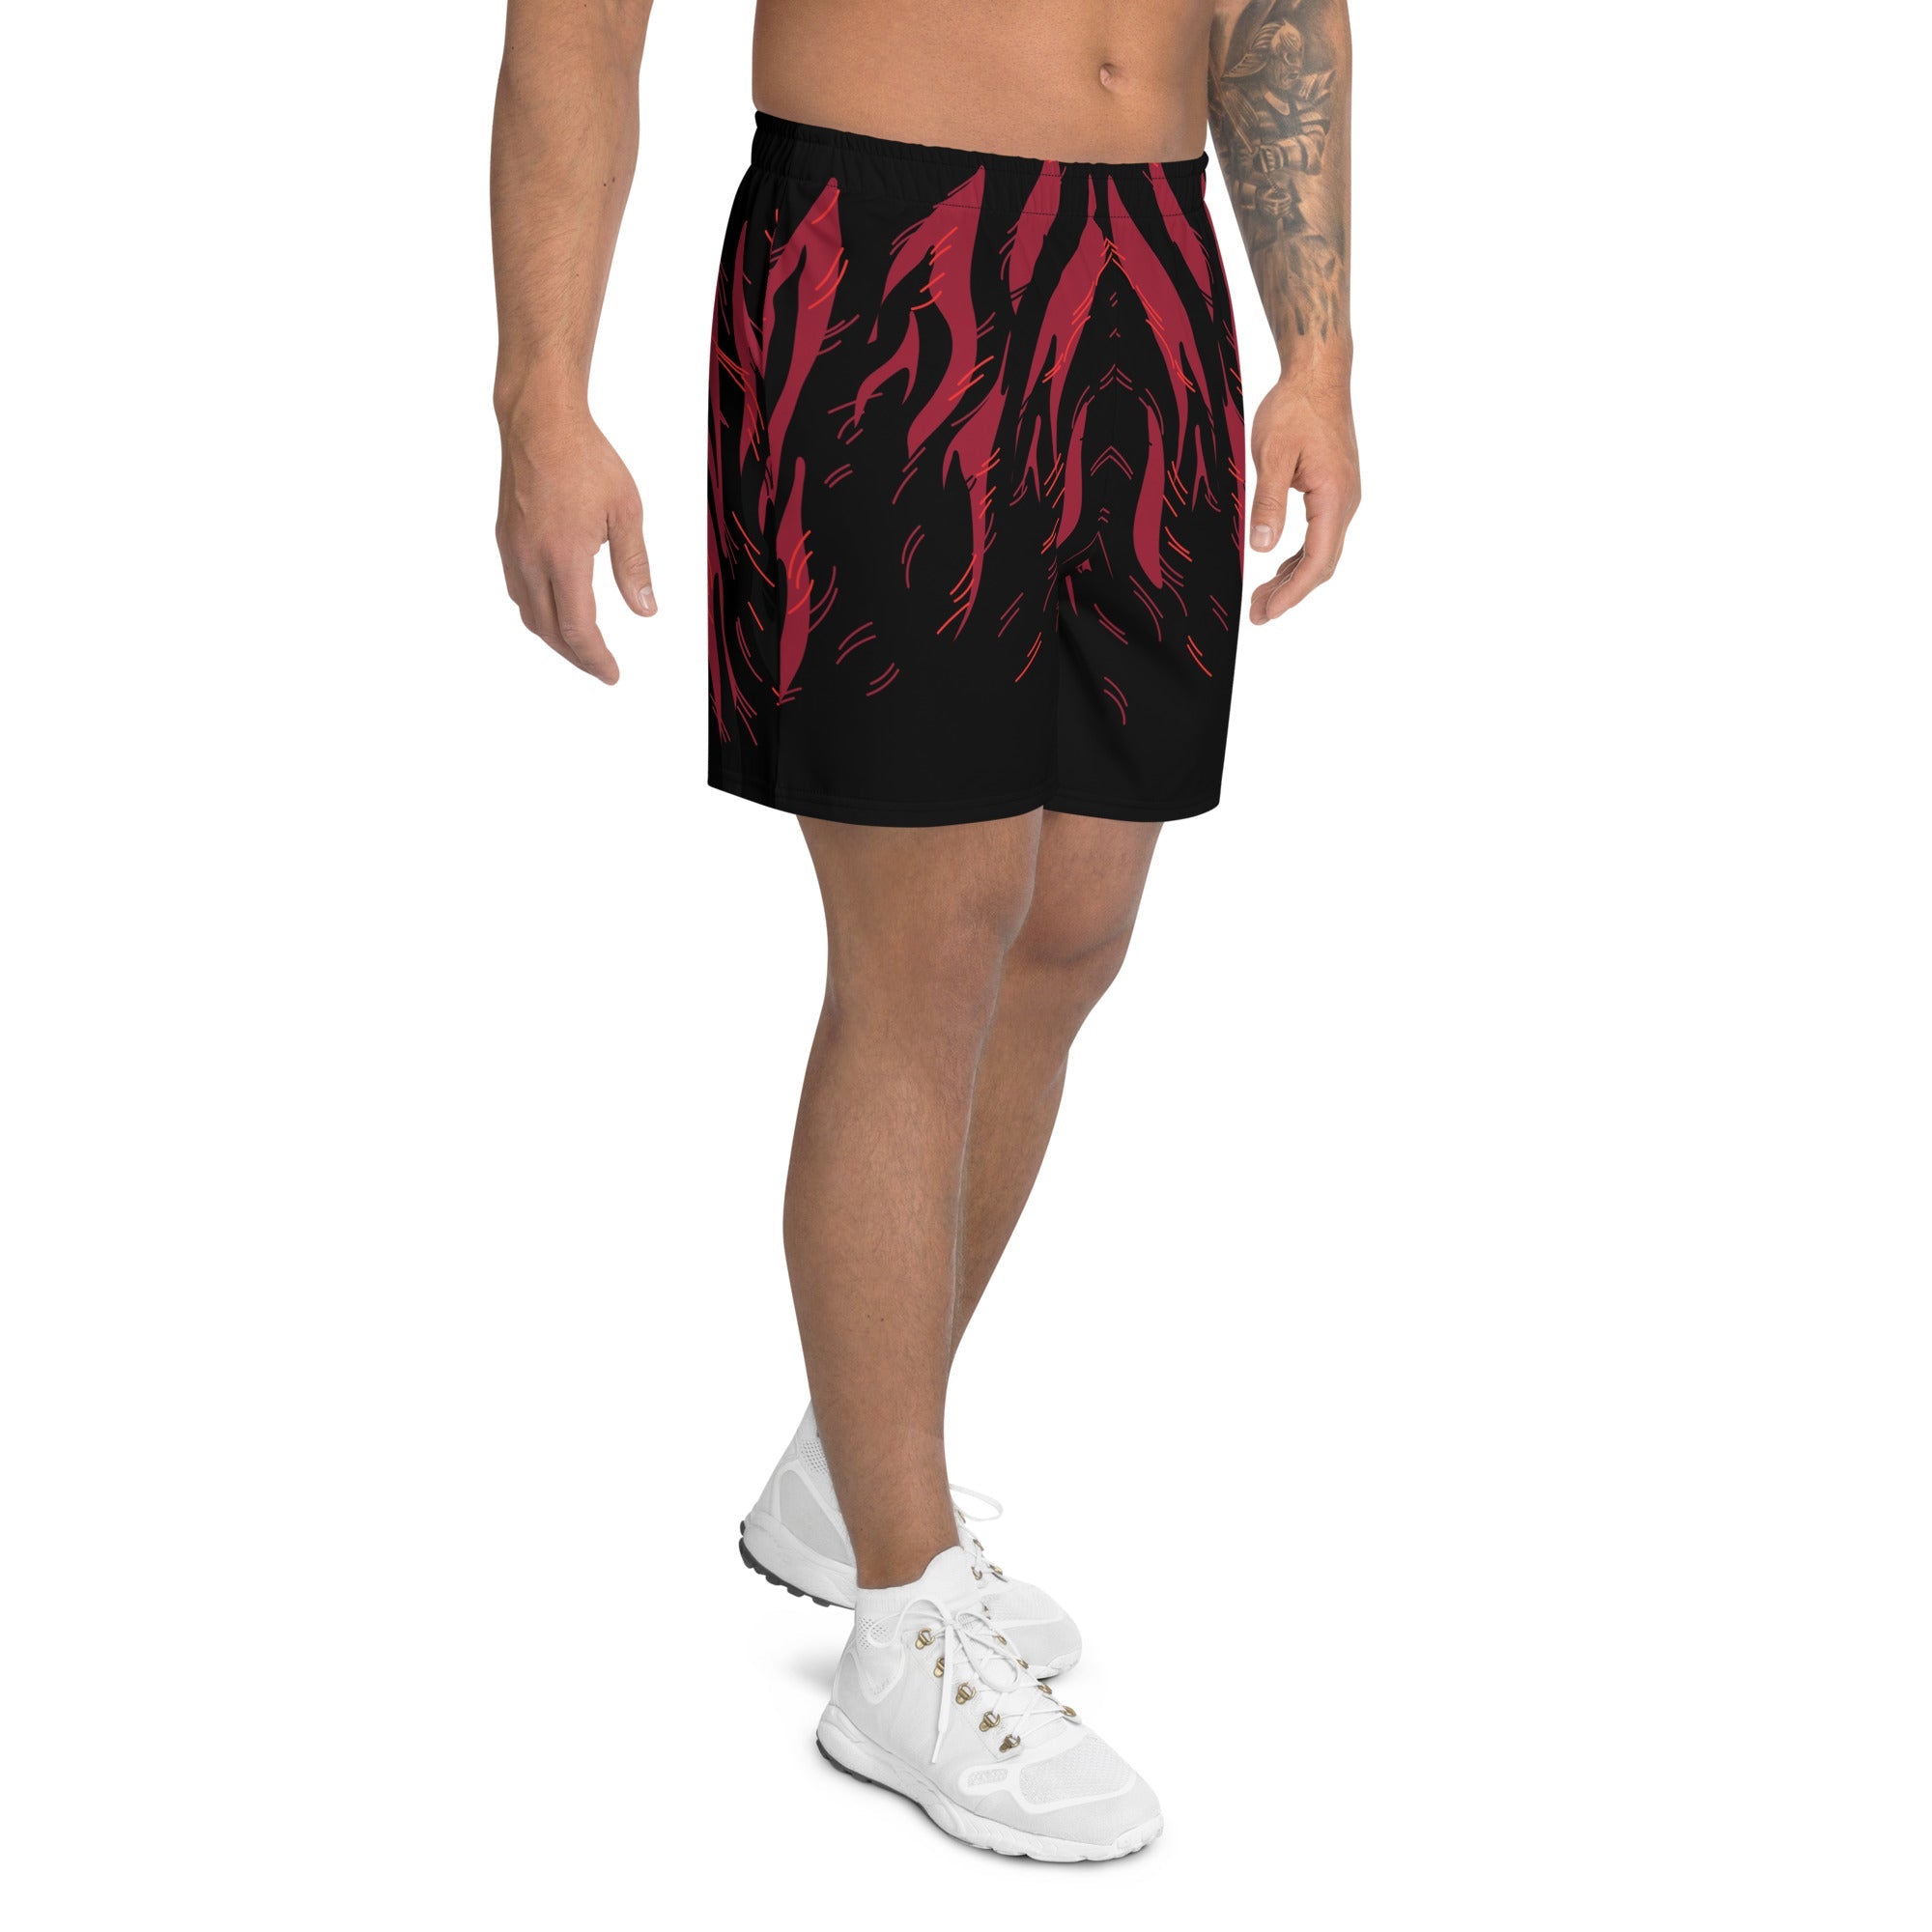 Red Striped Men's Wrestling Shorts Iron Fist Wrestling Wrestling Shorts